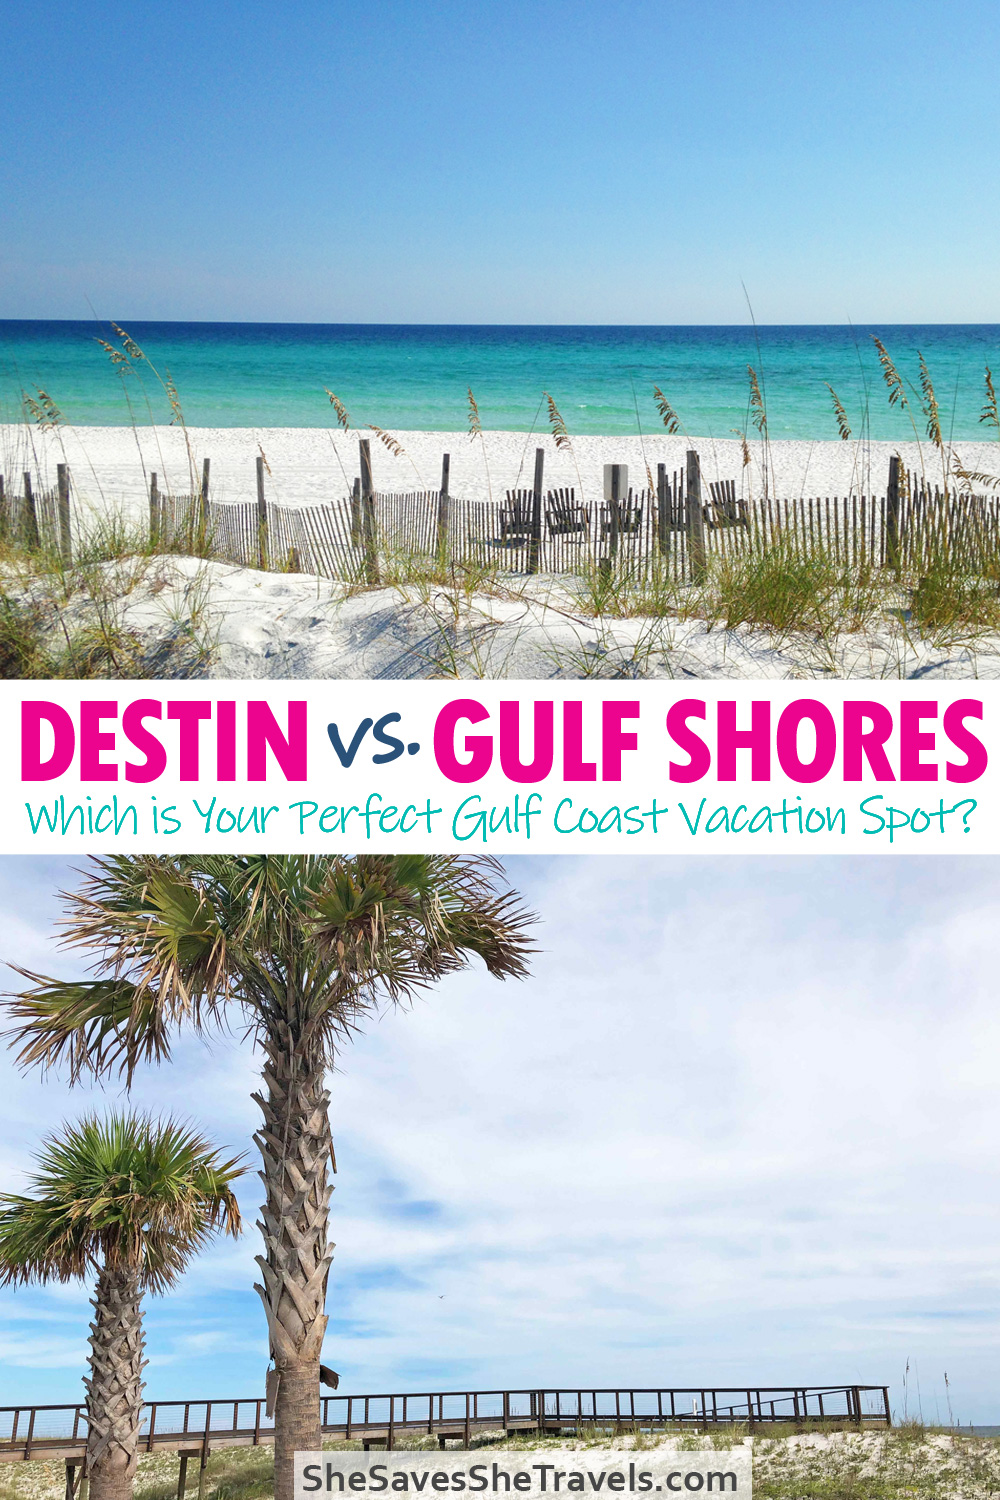 Destin vs Gulf Shores Which is Your Perfect Vacation Spot?